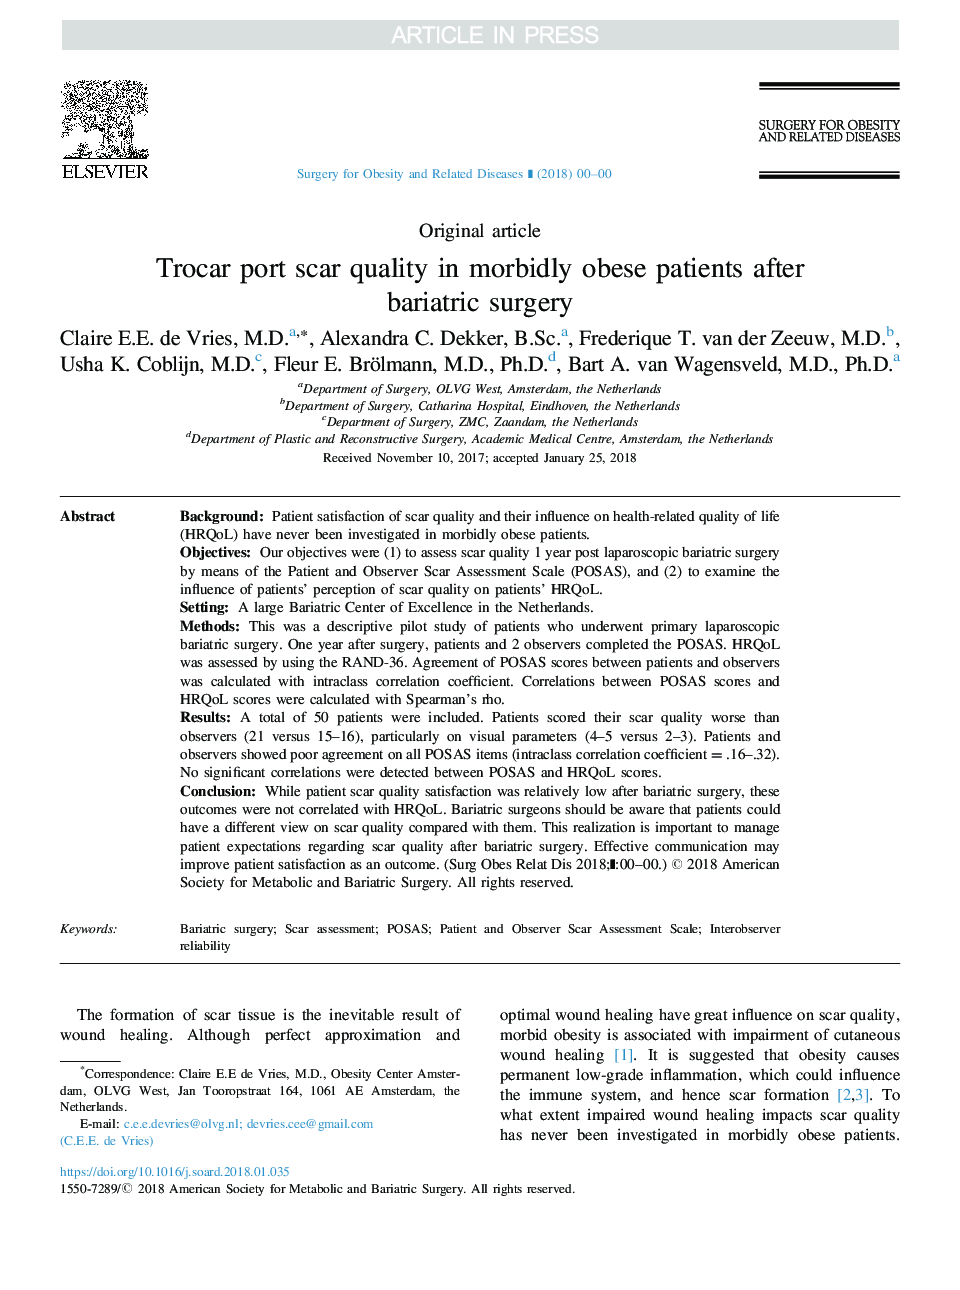 Trocar port scar quality in morbidly obese patients after bariatric surgery